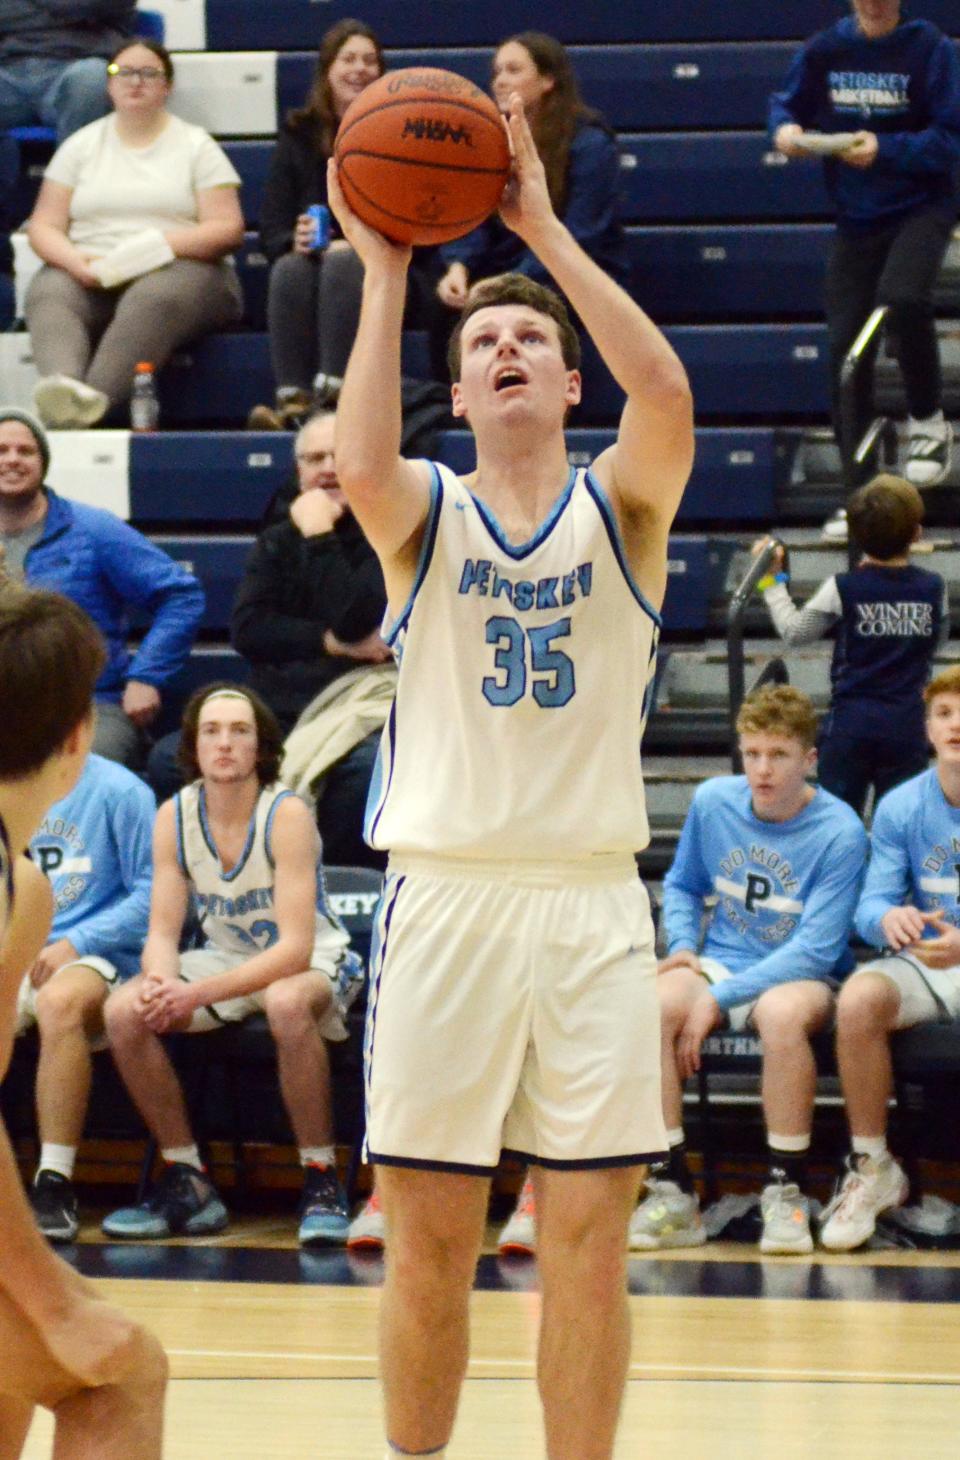 Petoskey's Jackson Jonker gets a layup under the basket in the second half.